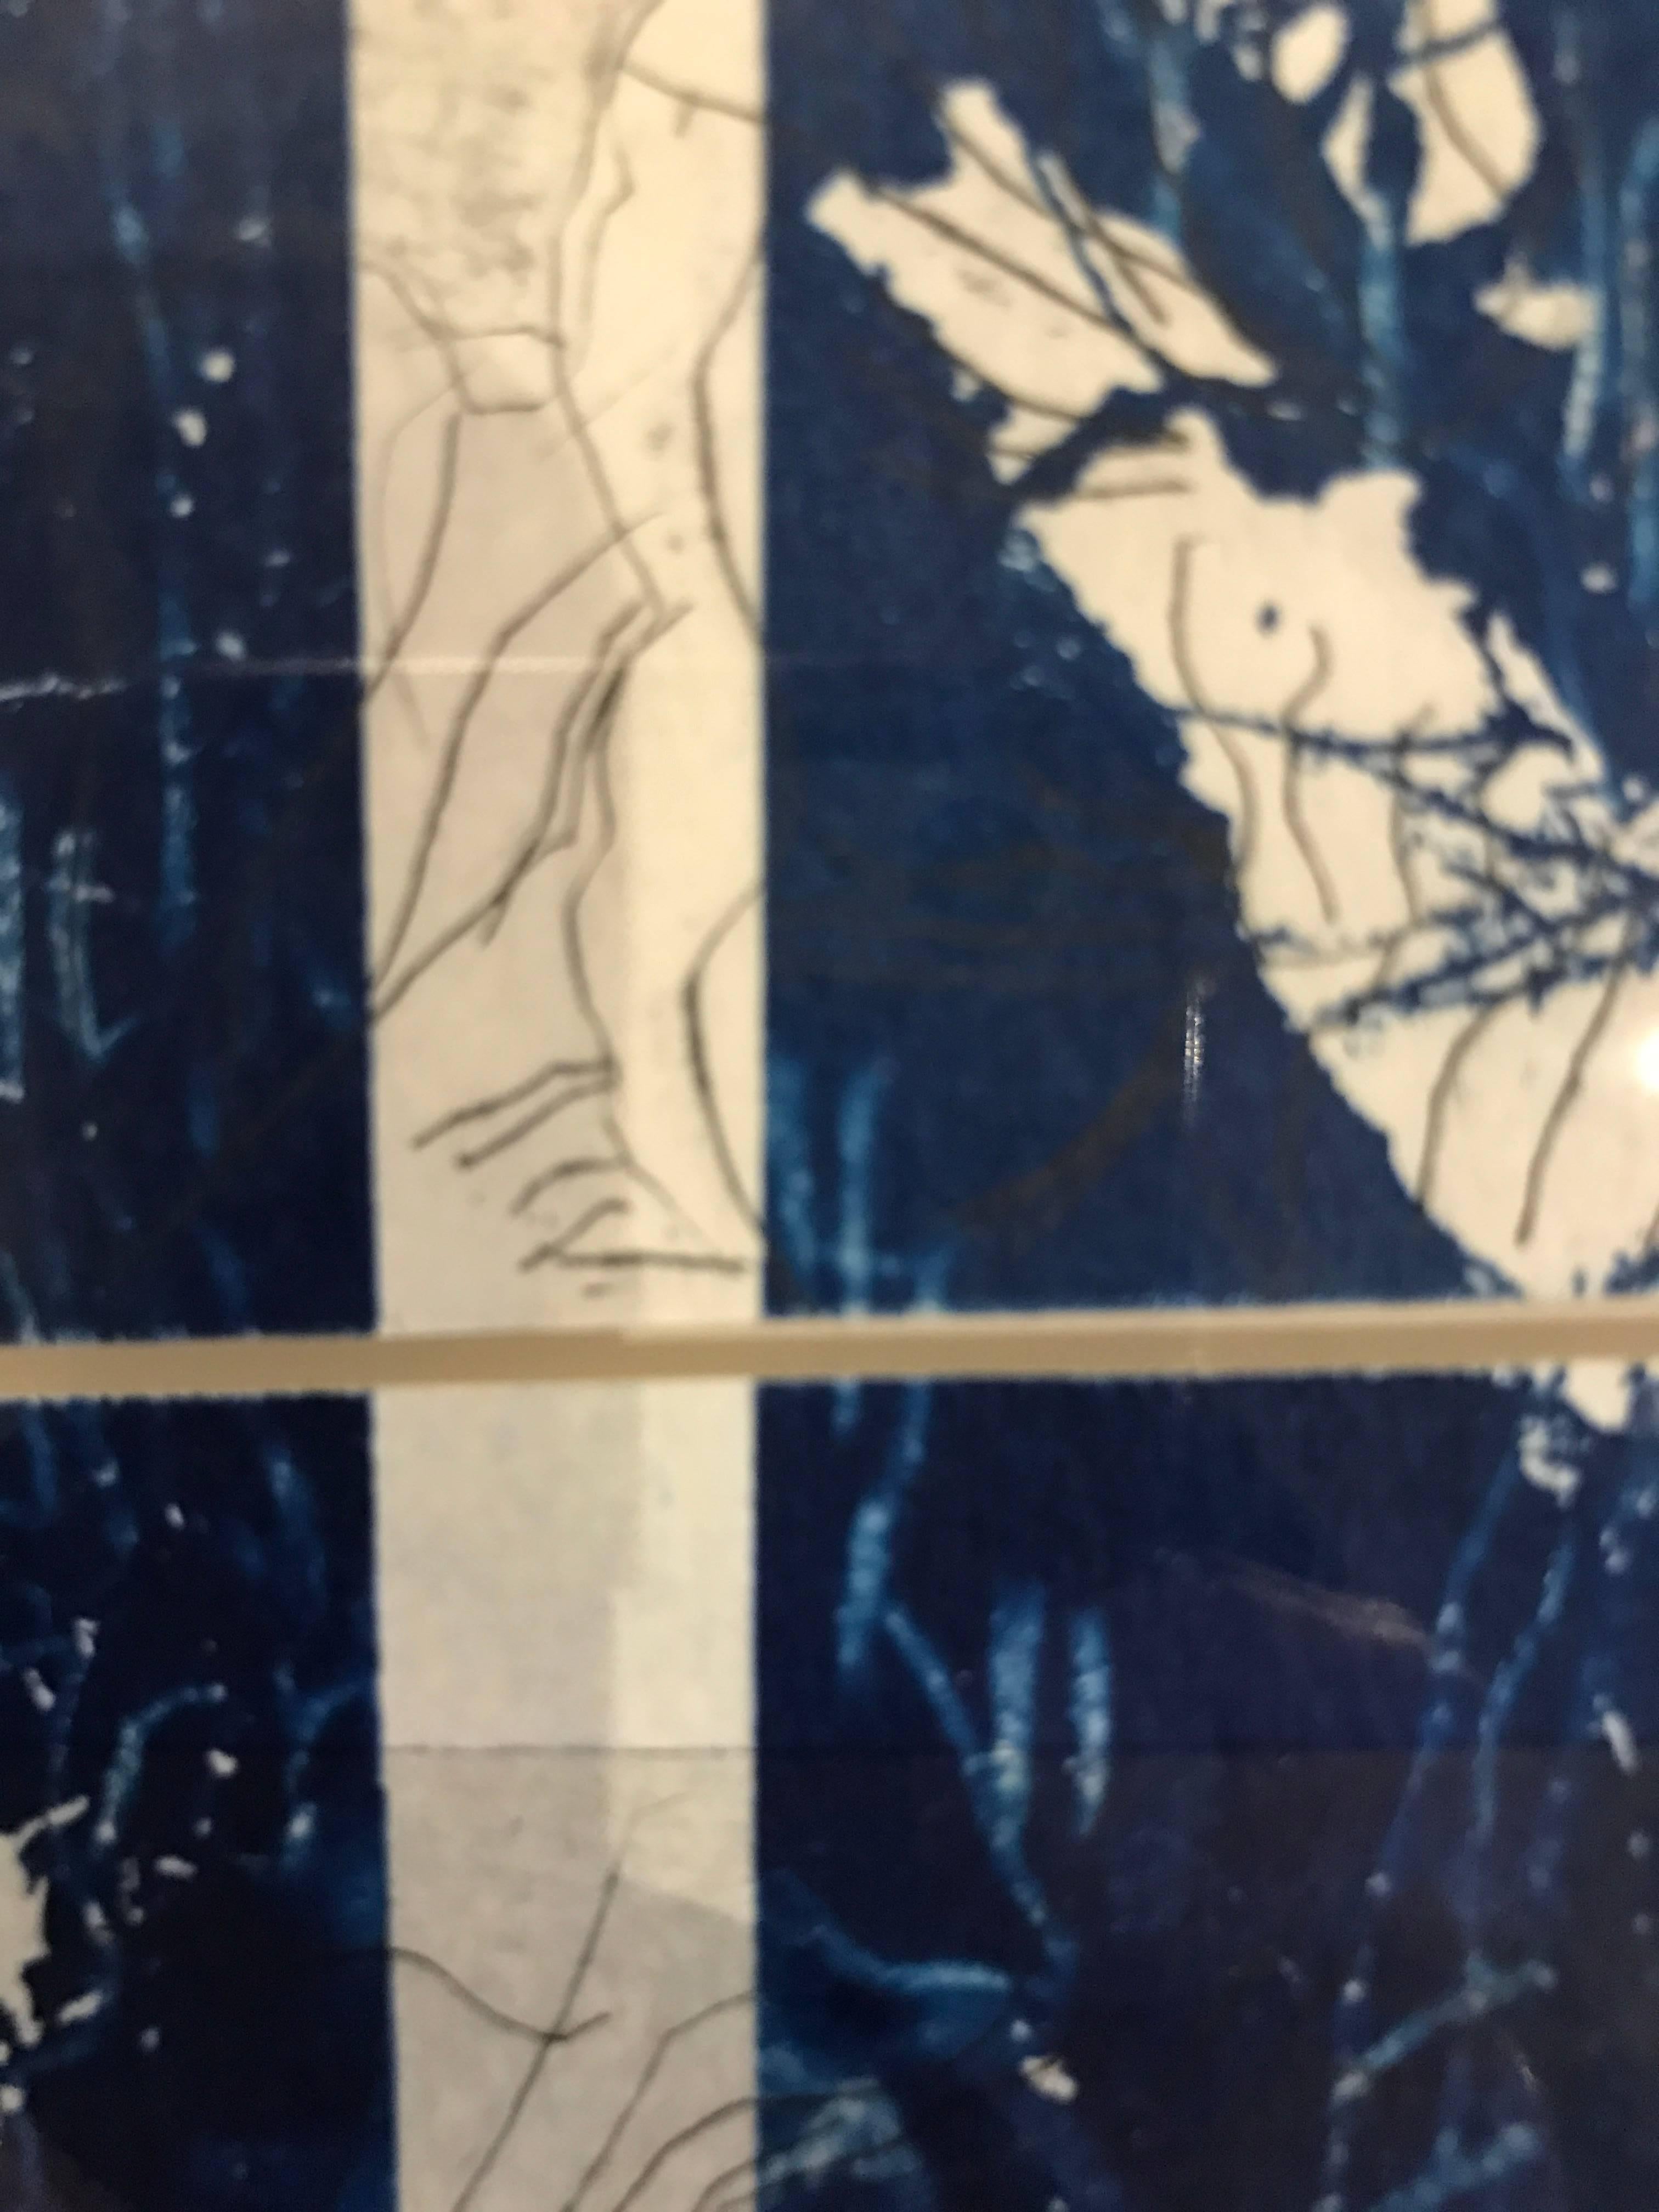 Contemporary American artist Sandra Constantine recreates the effect of an old architects blue print using the print type Cyanotype
developed by an English scientist, John Frederick William Herschel in 1842.
Cyanotype is made by coating paper with